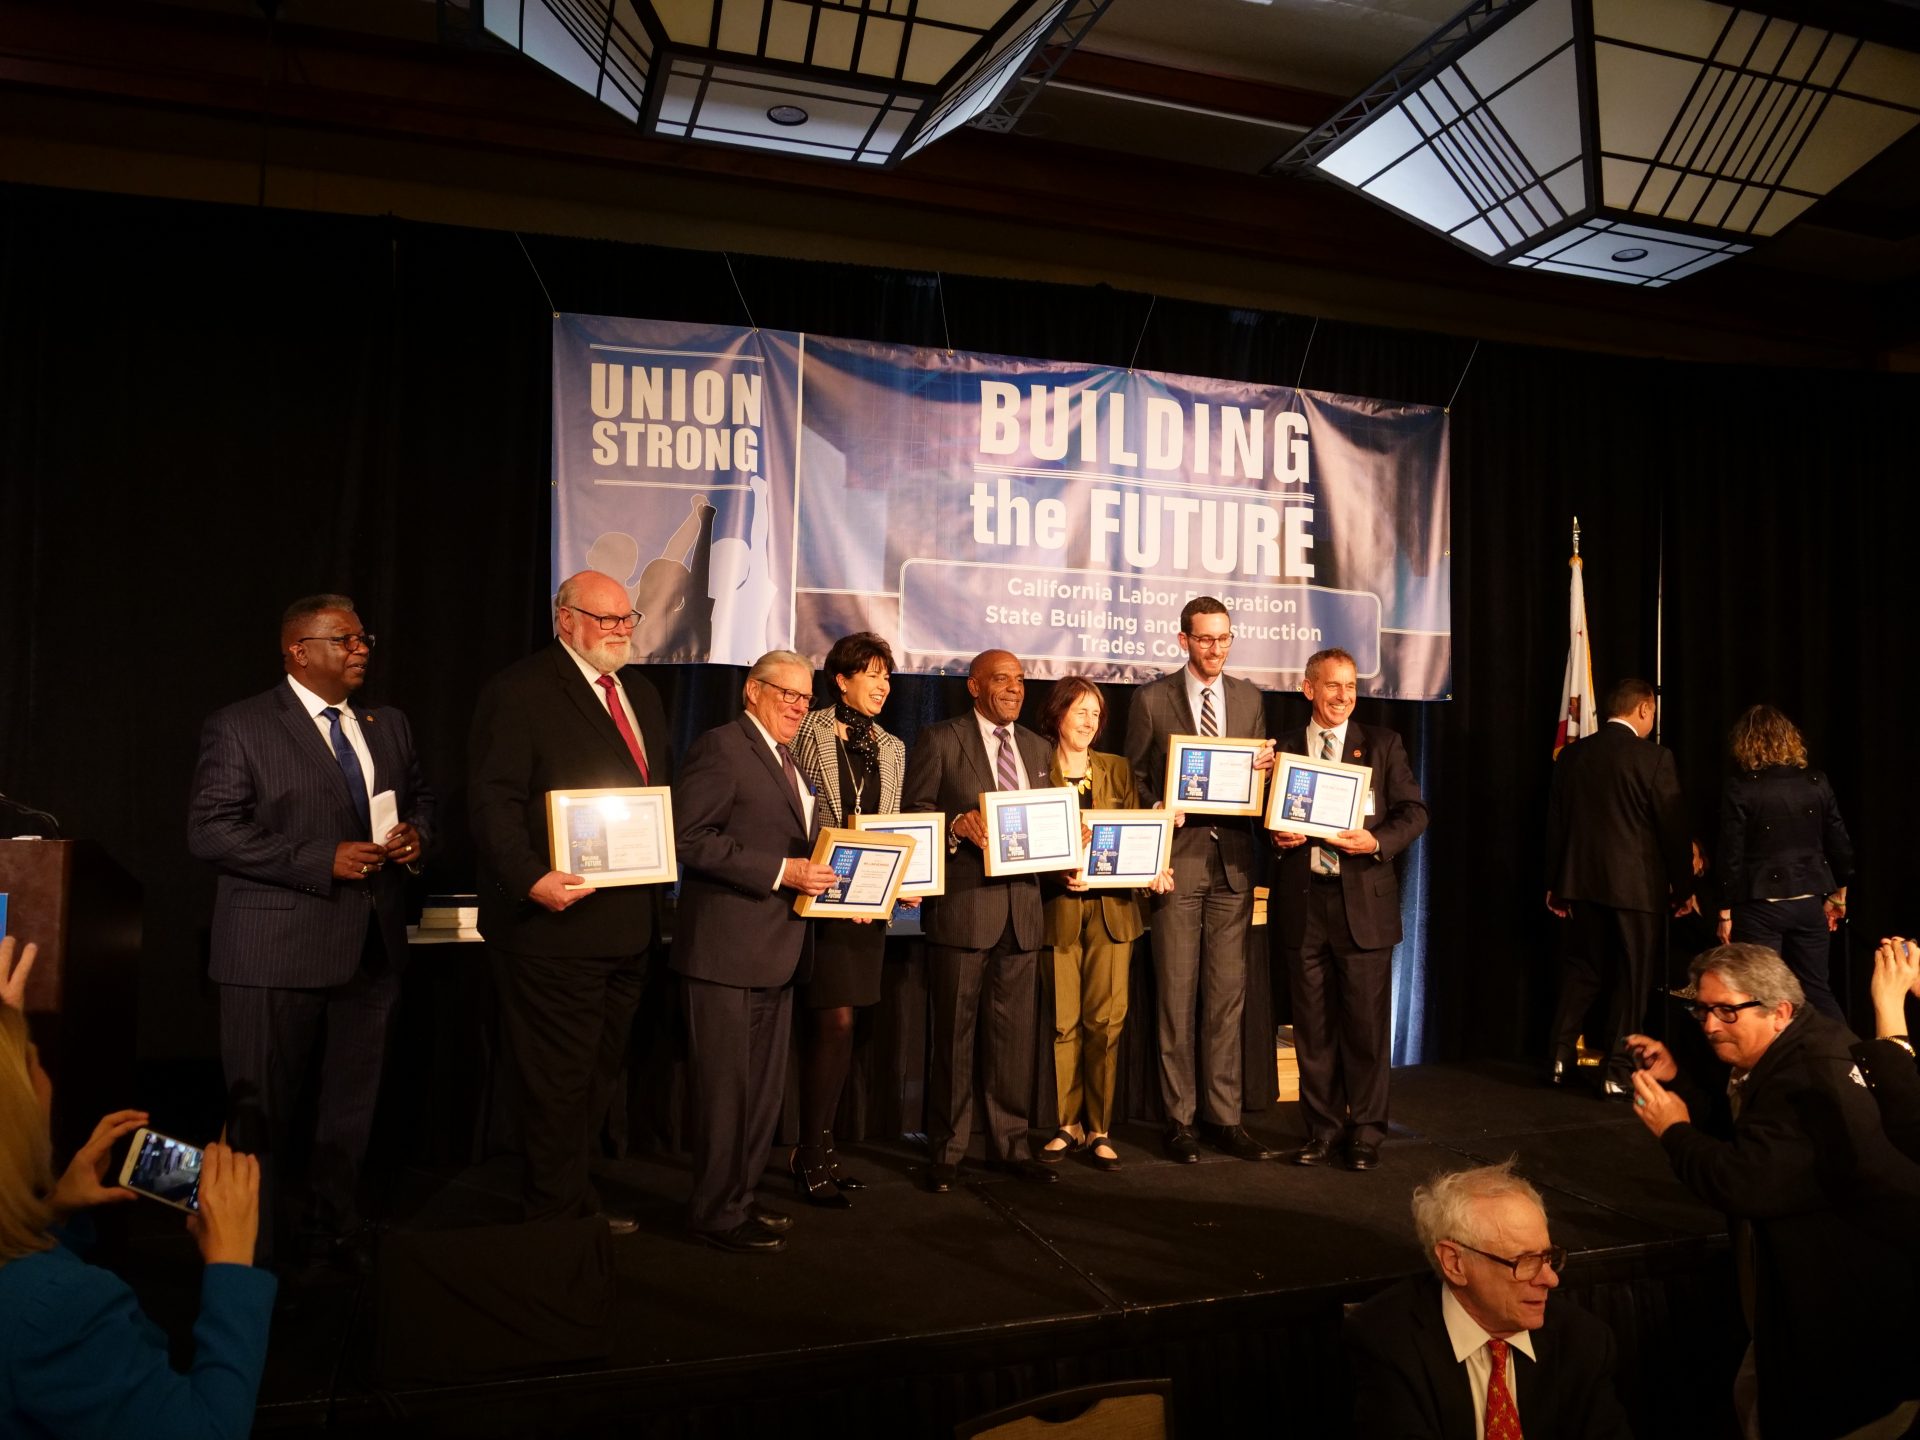 Image from the Gallery: Labor’s Joint Legislative Conference – Sacramento, CA